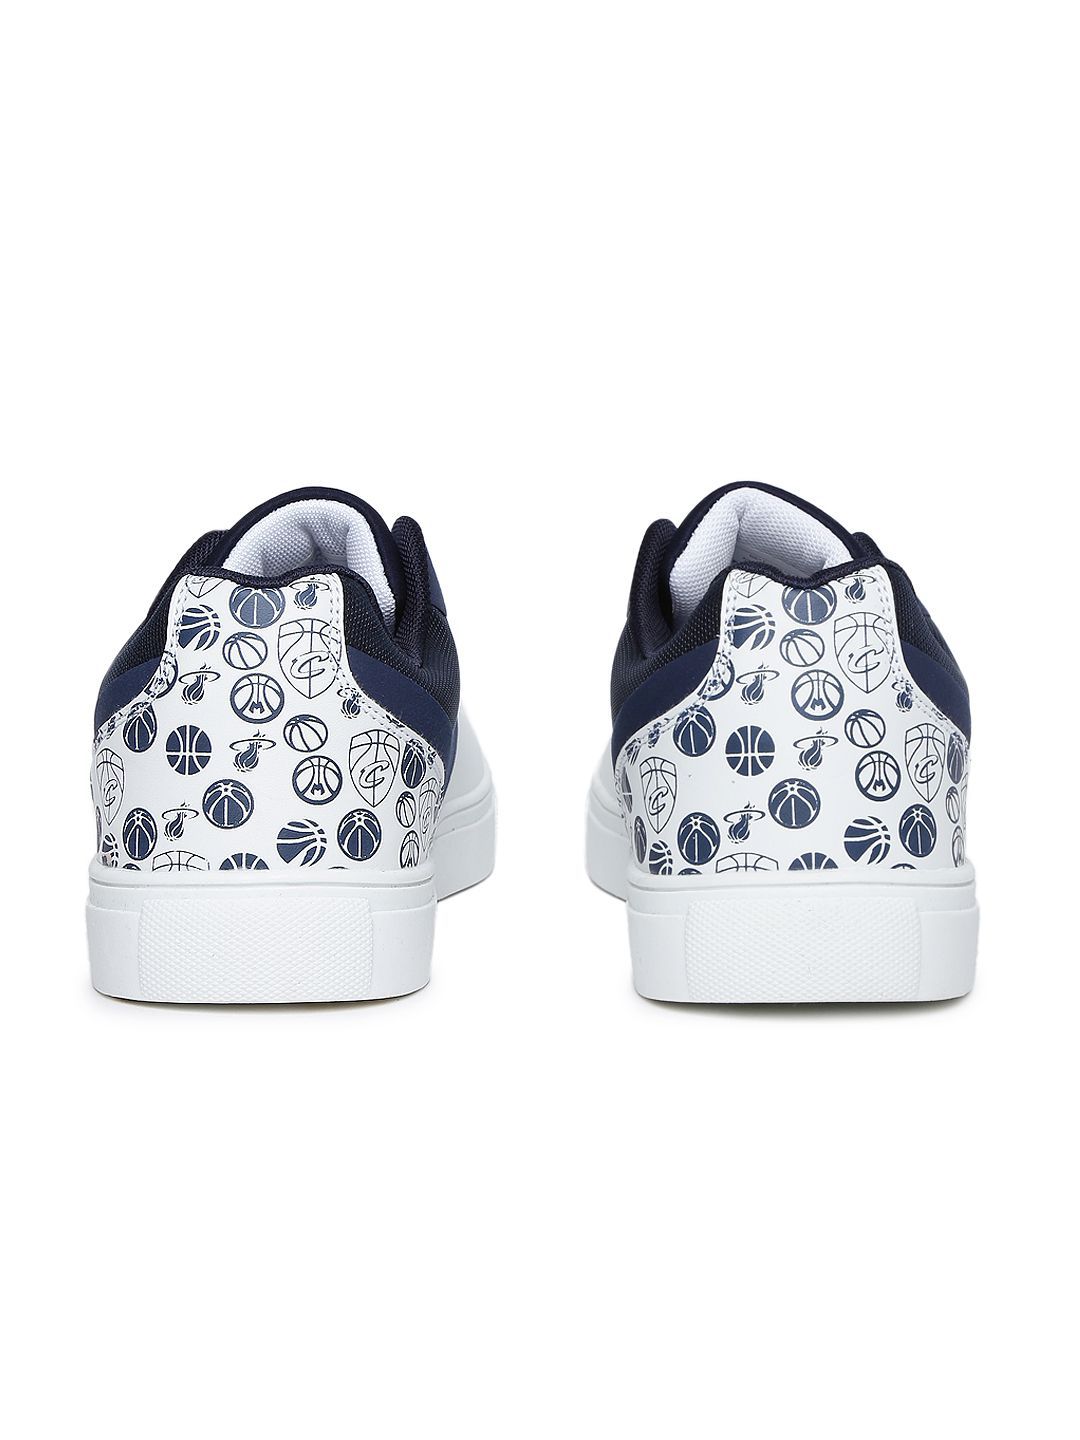 Buy NBA Sneakers Navy Casual Shoes 